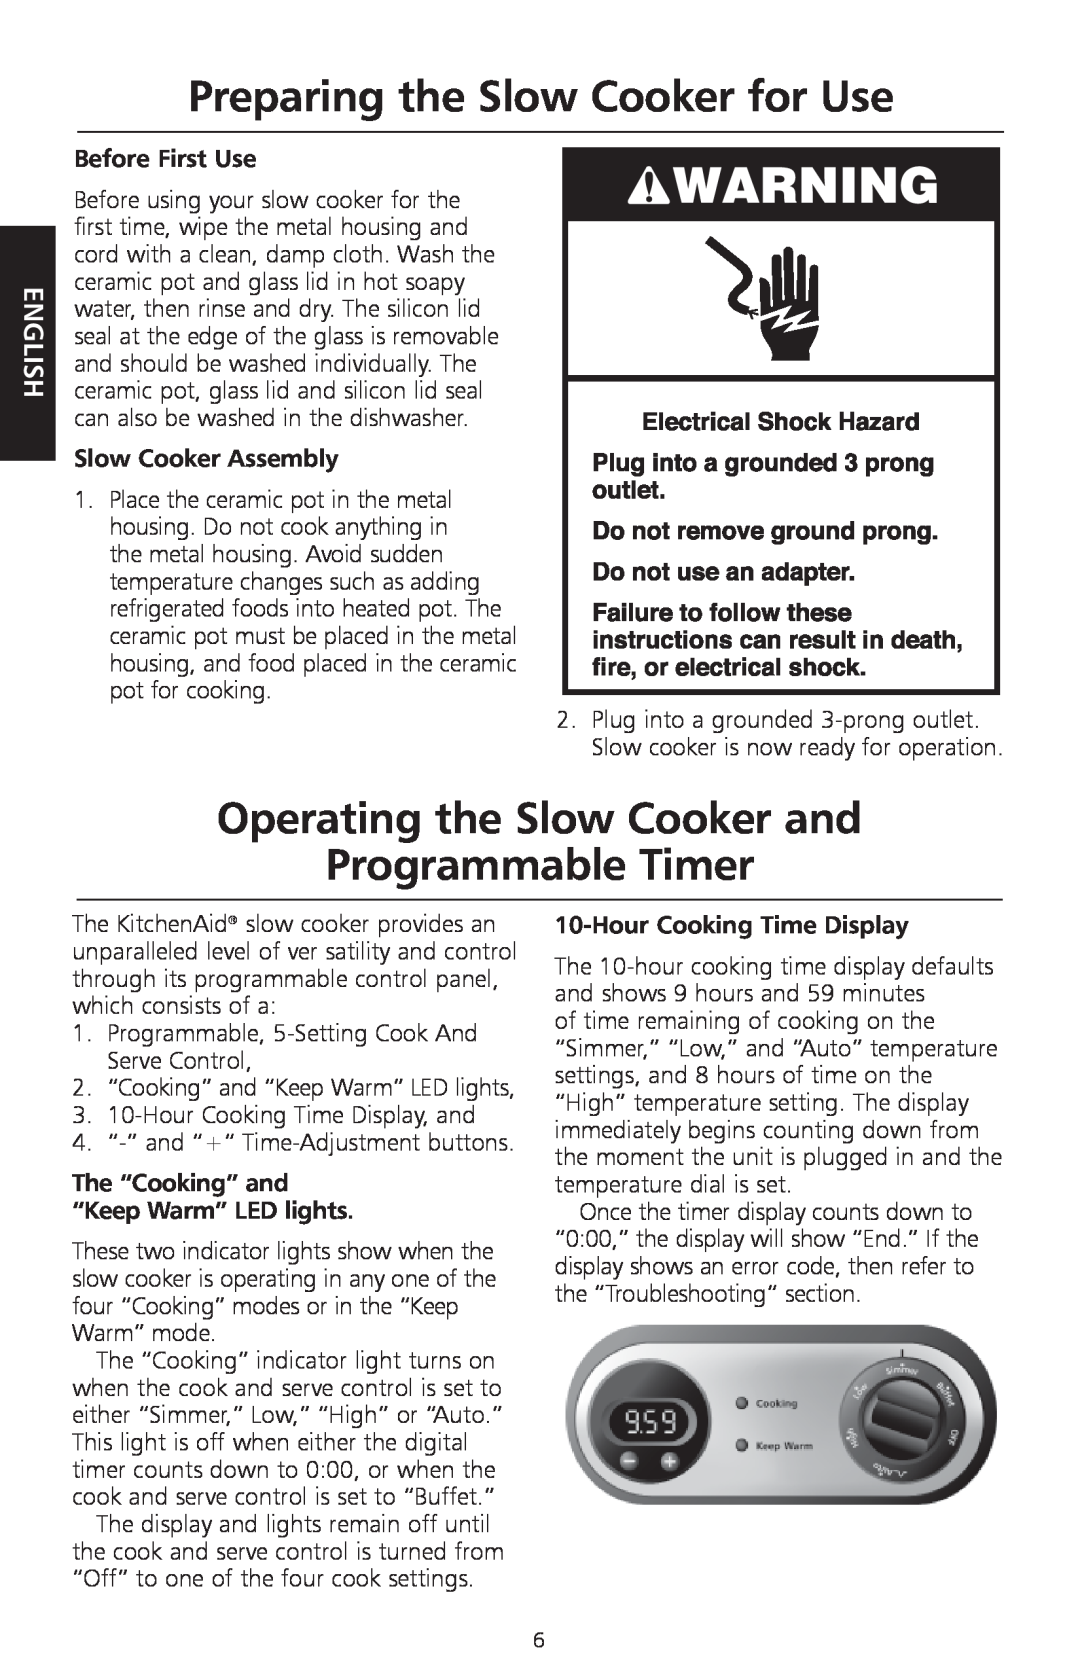 KitchenAid KSC700 manual Preparing the Slow Cooker for Use, Operating the Slow Cooker and Programmable Timer, English 